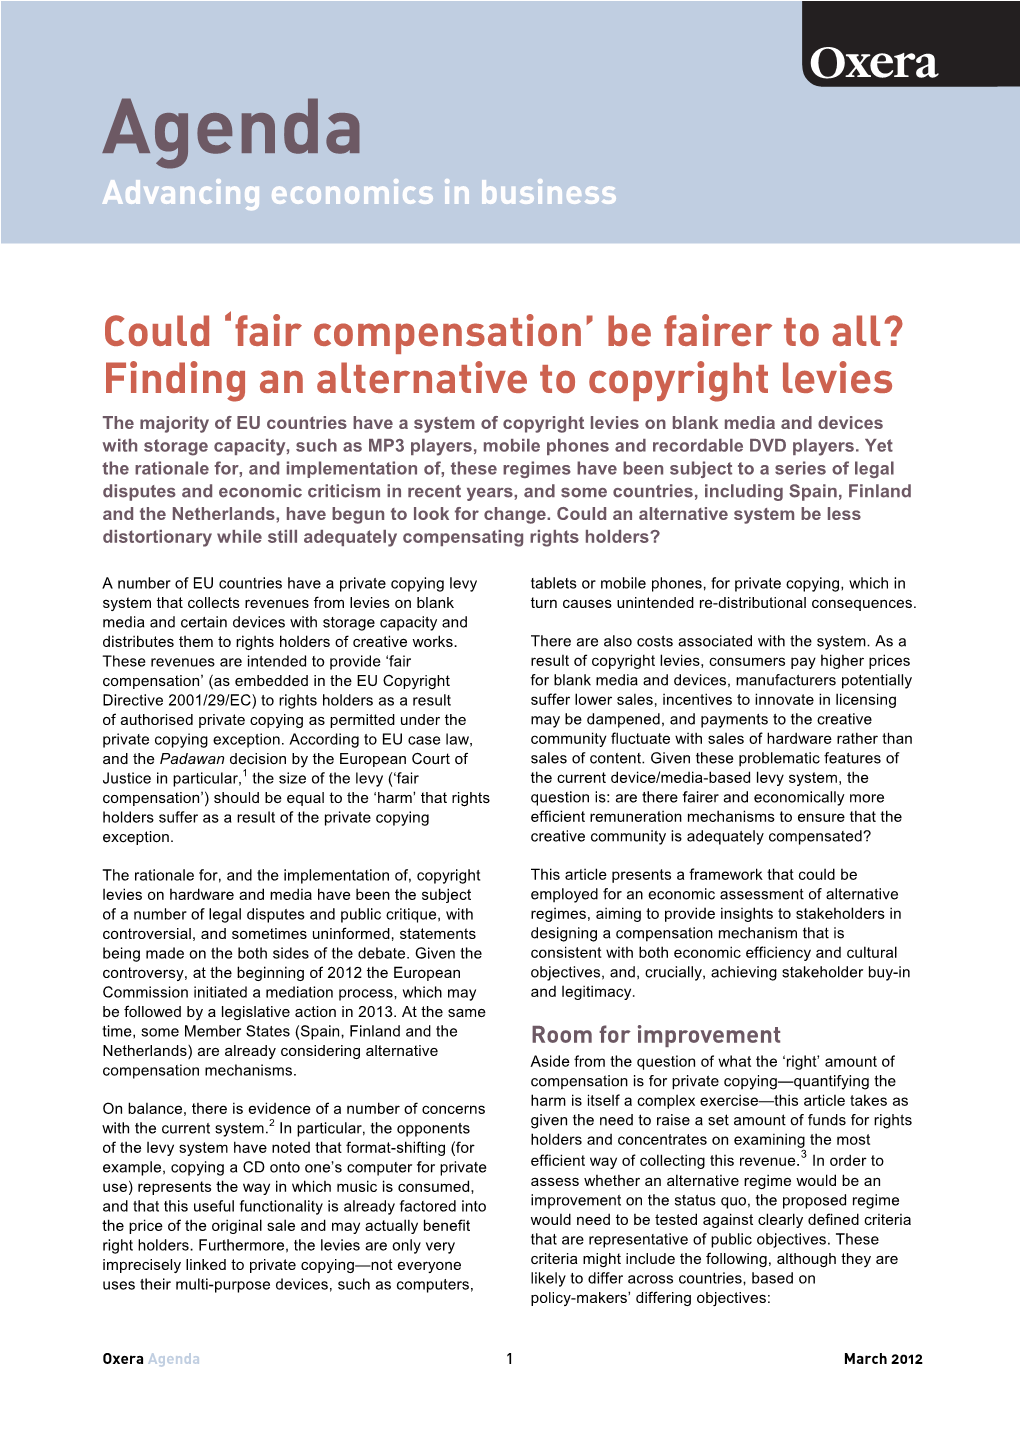 Finding an Alternative to Copyright Levies